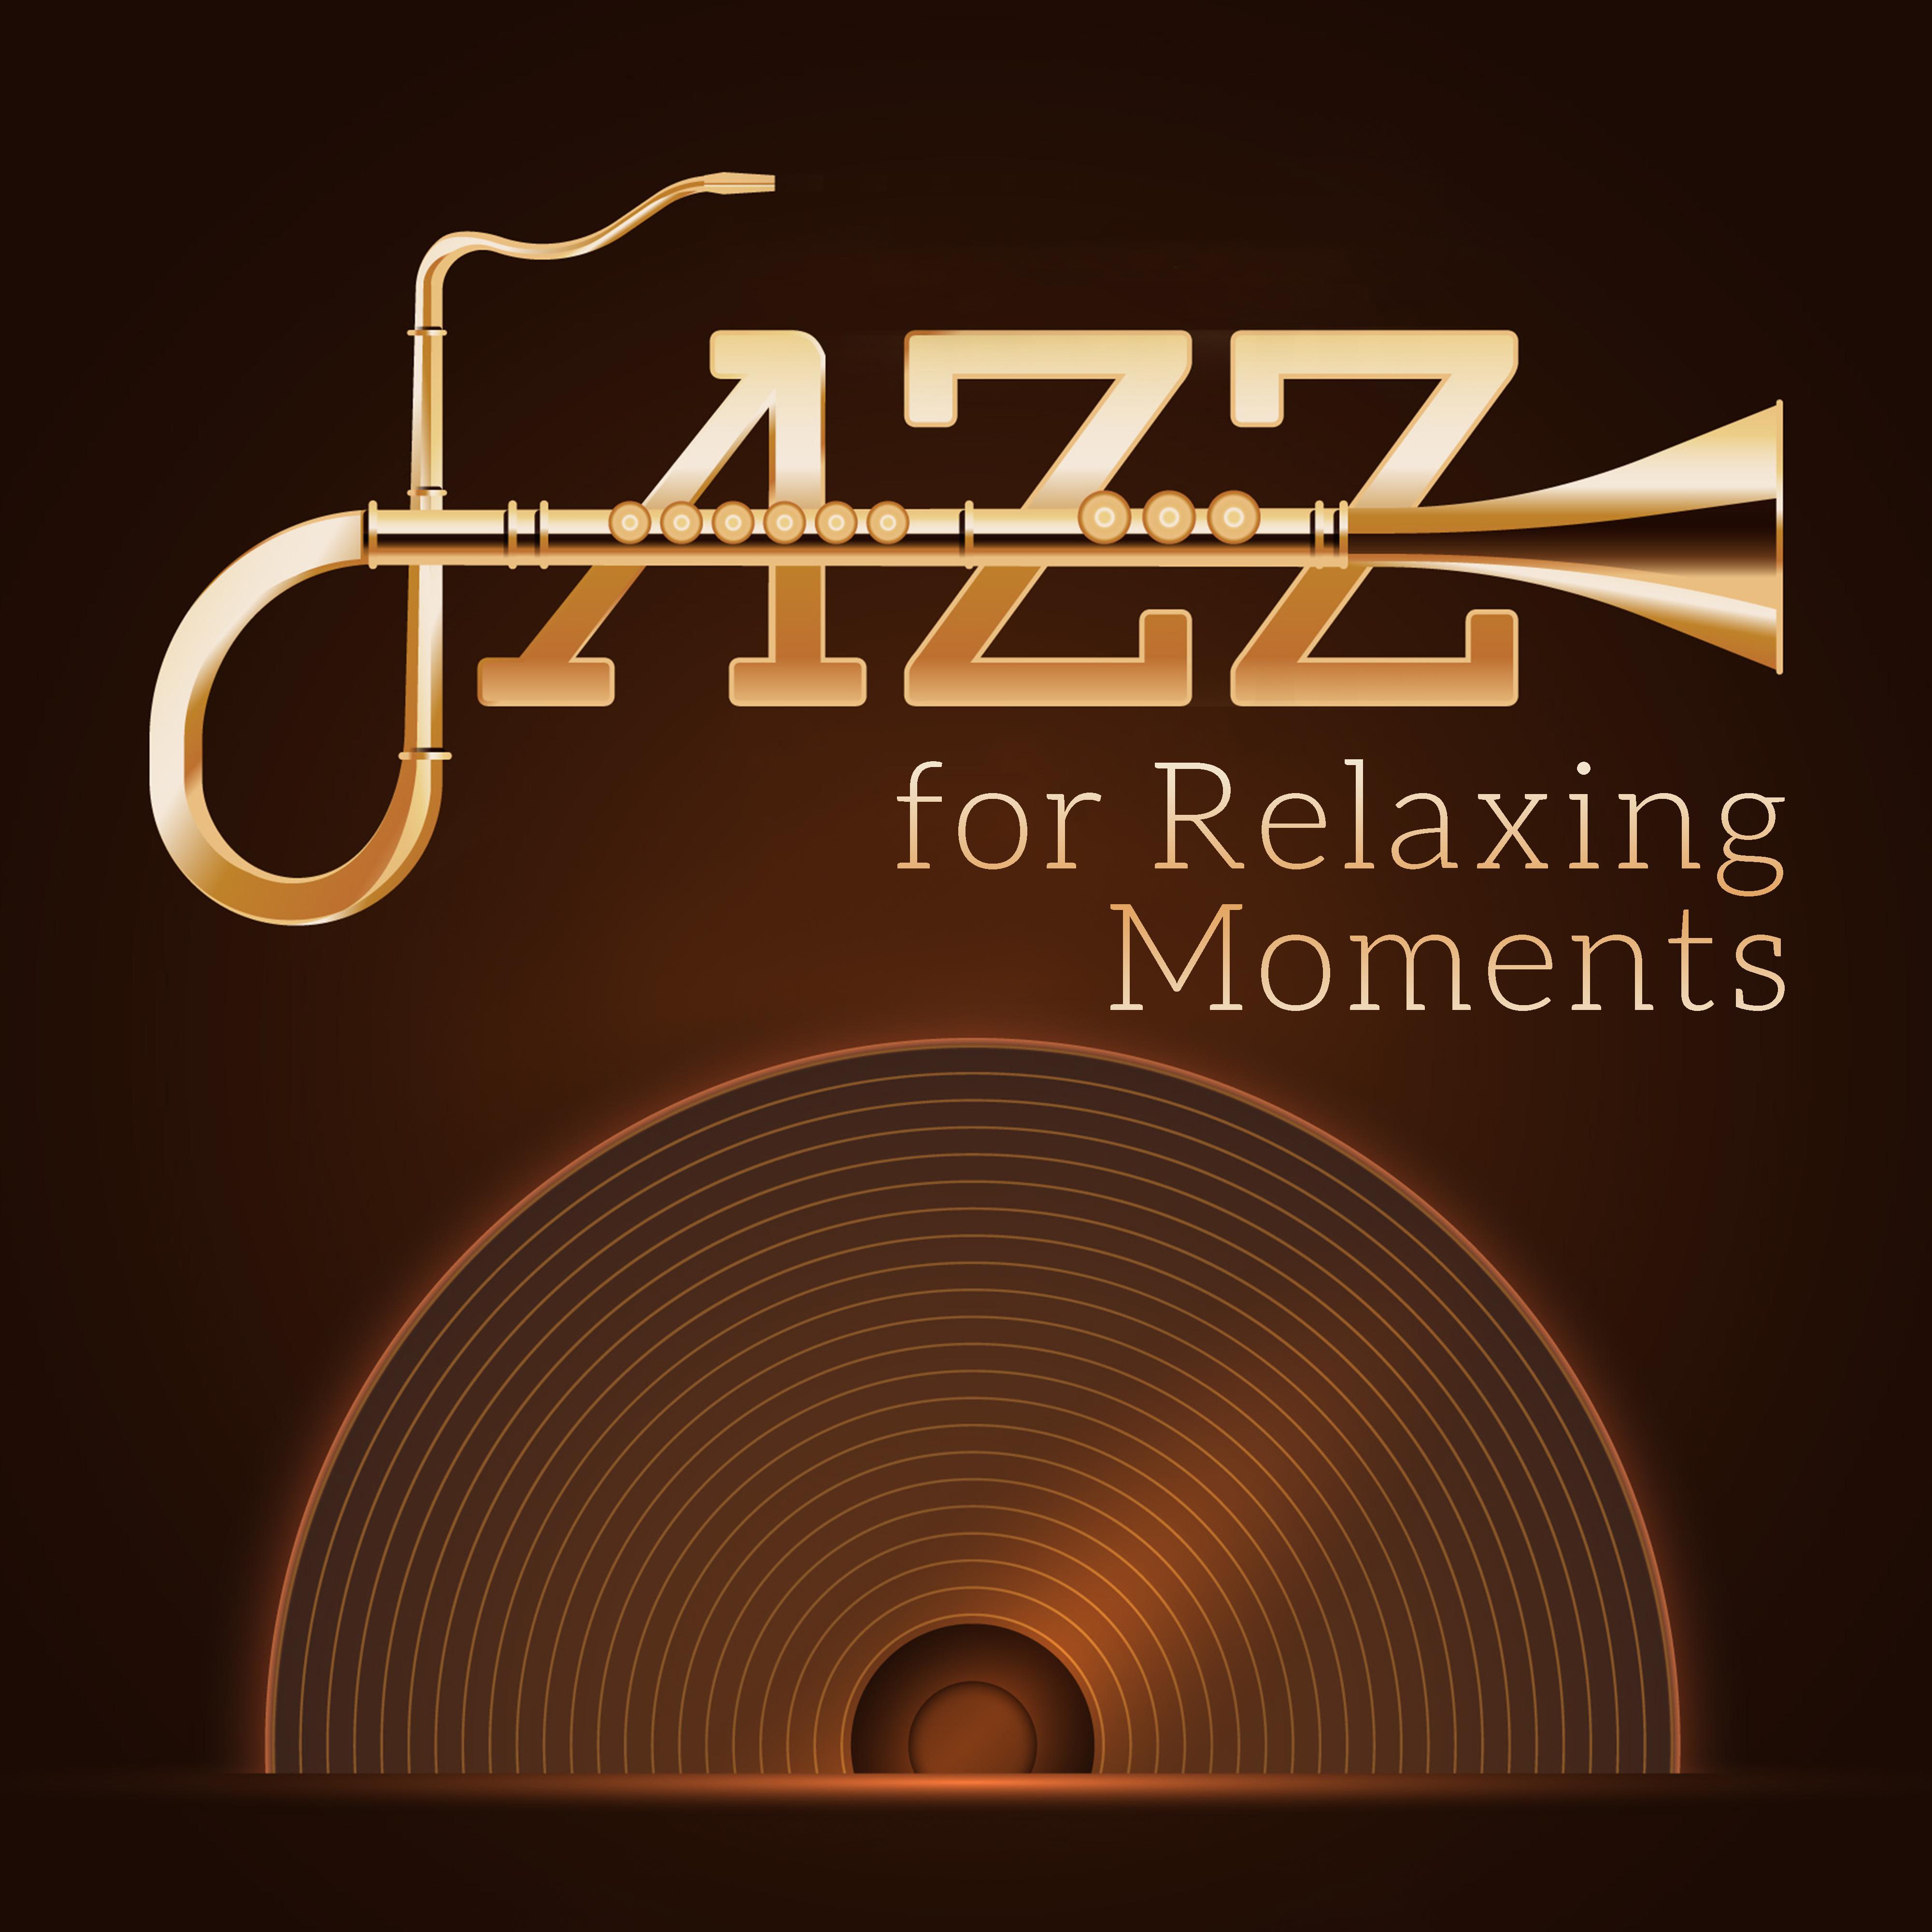 Jazz for Relaxing Moments